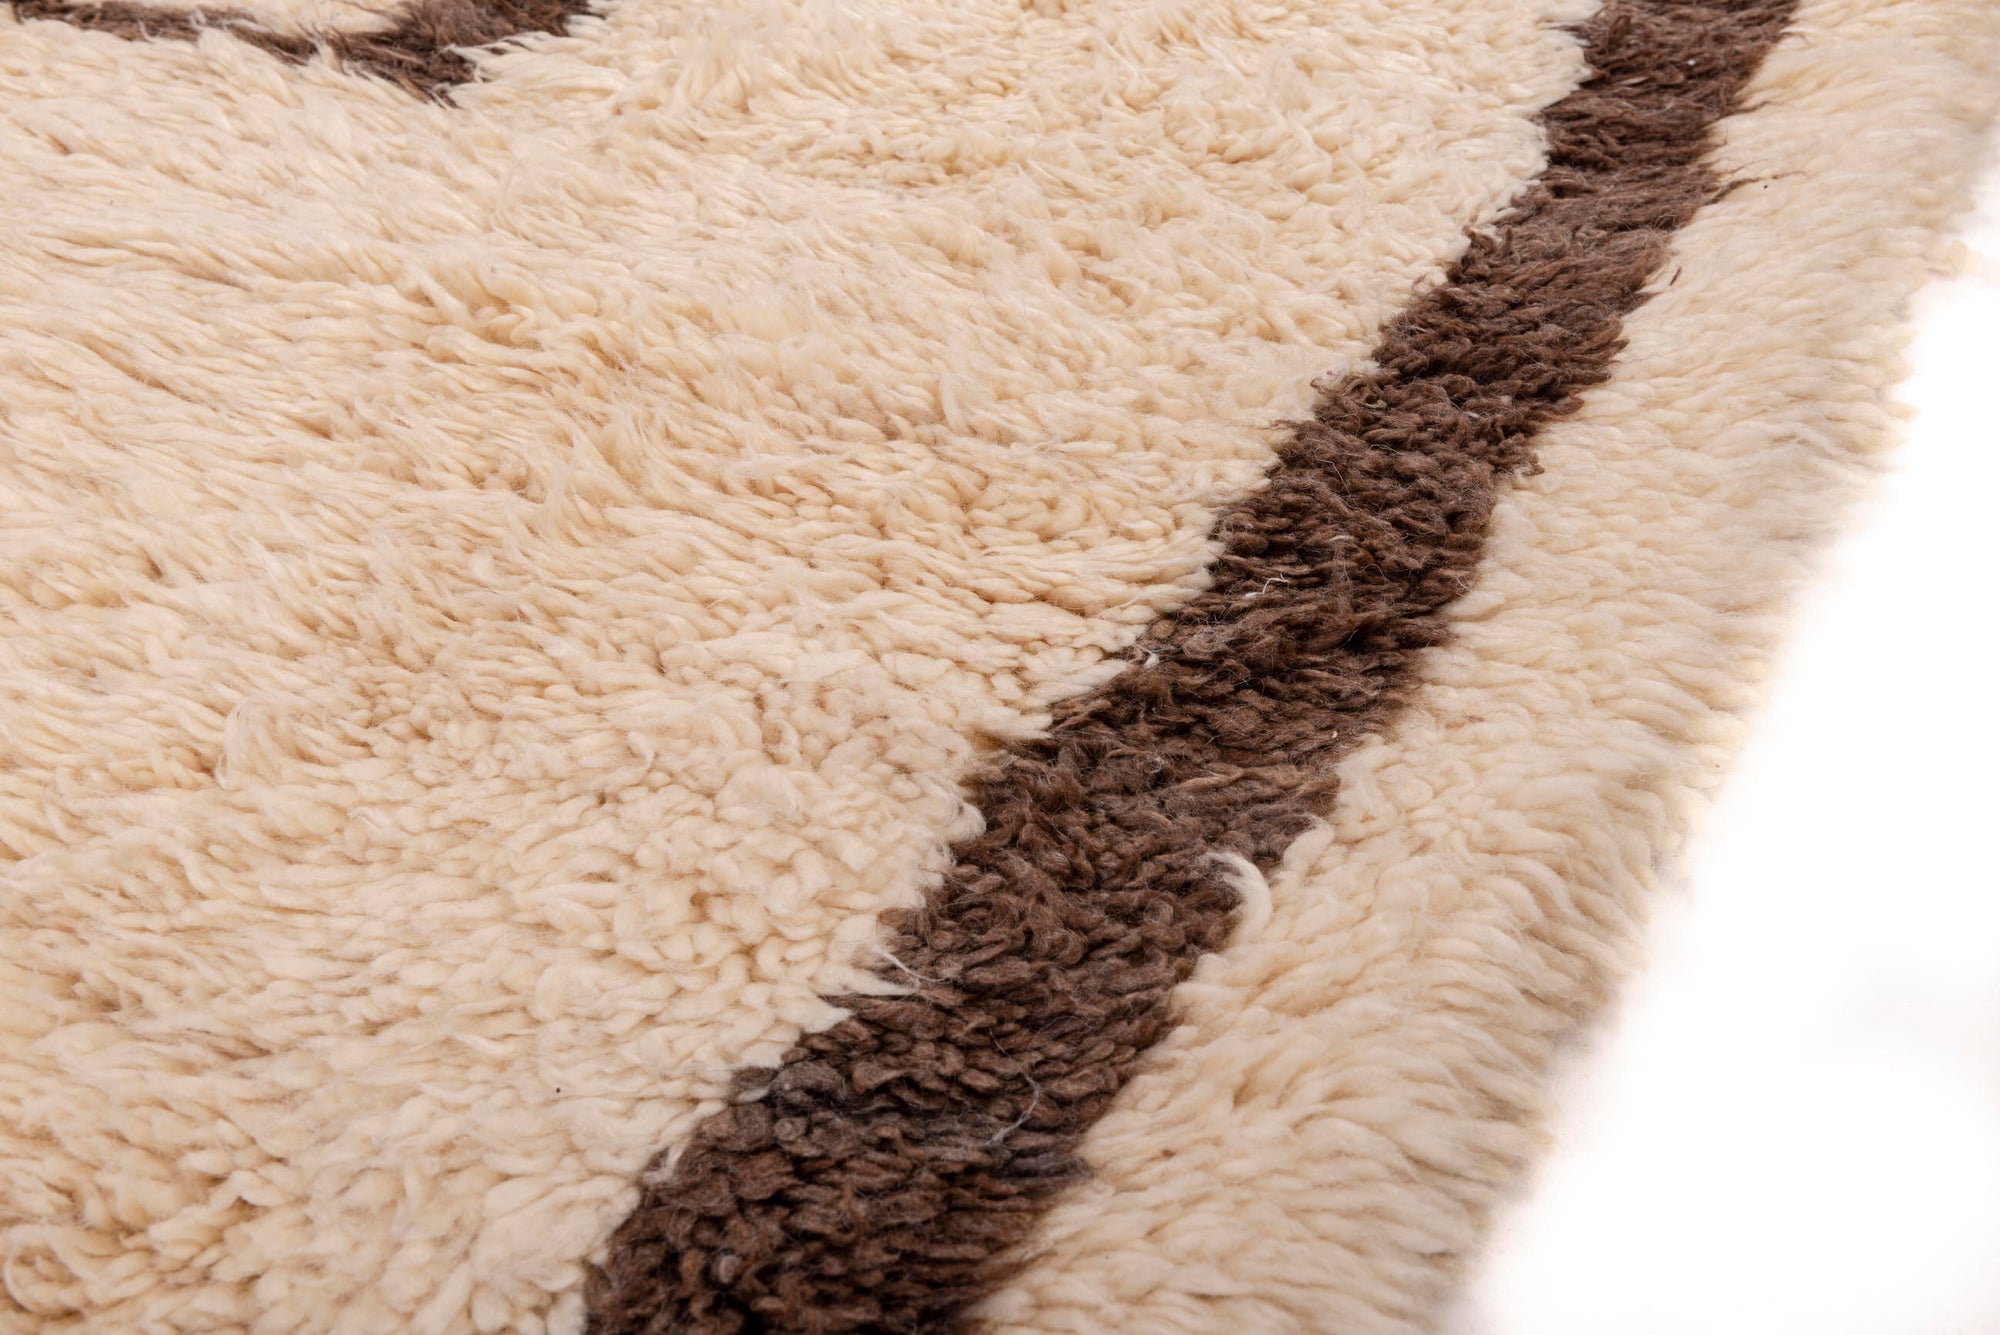 Elevate your decor with our 'Ivory Square Frame Beni Ourain Rug.' Featuring an ivory base with a small square frame in rich brown at the center, and a broader brown border at the edges, this rug exudes minimalistic elegance that's perfect for enhancing your space.